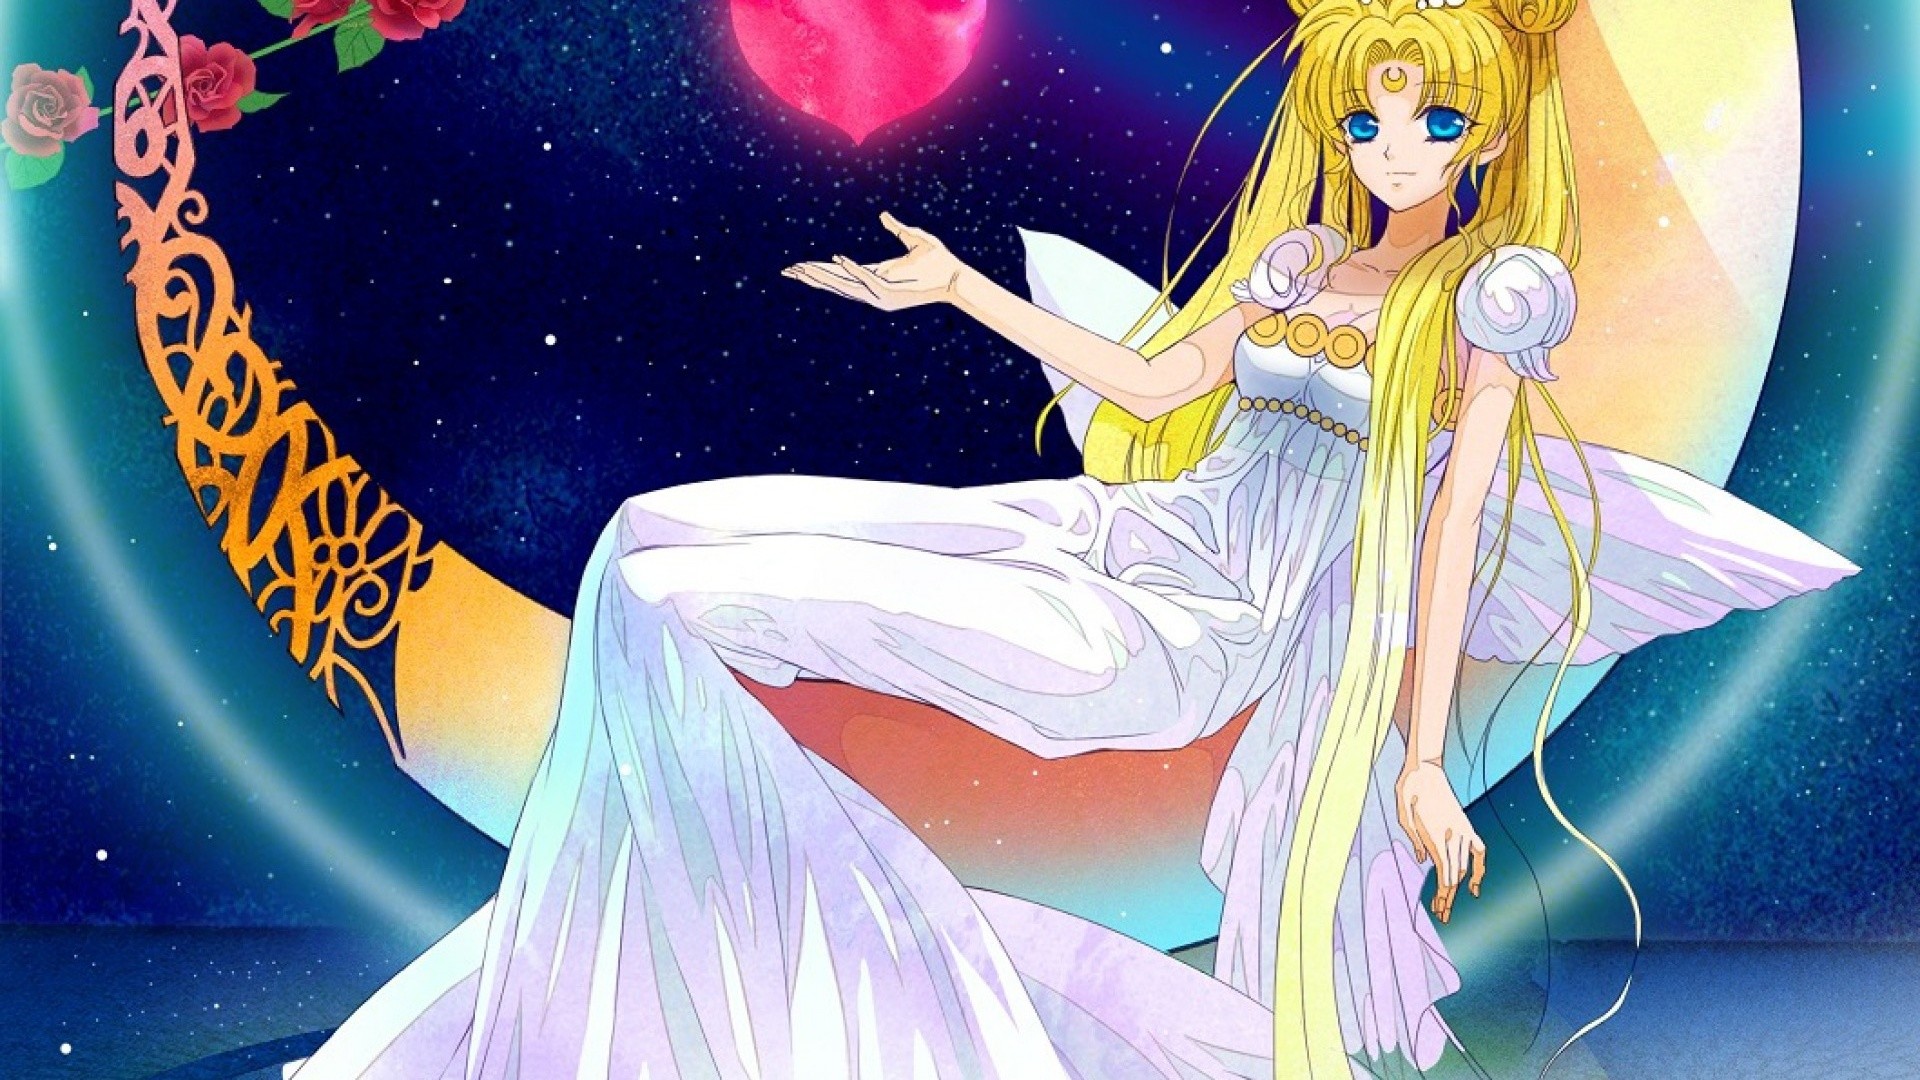 1920x1080  Sailor Moon 26. How to set wallpaper on your desktop? Click the  download link from above and set the wallpaper on the desktop from your OS.